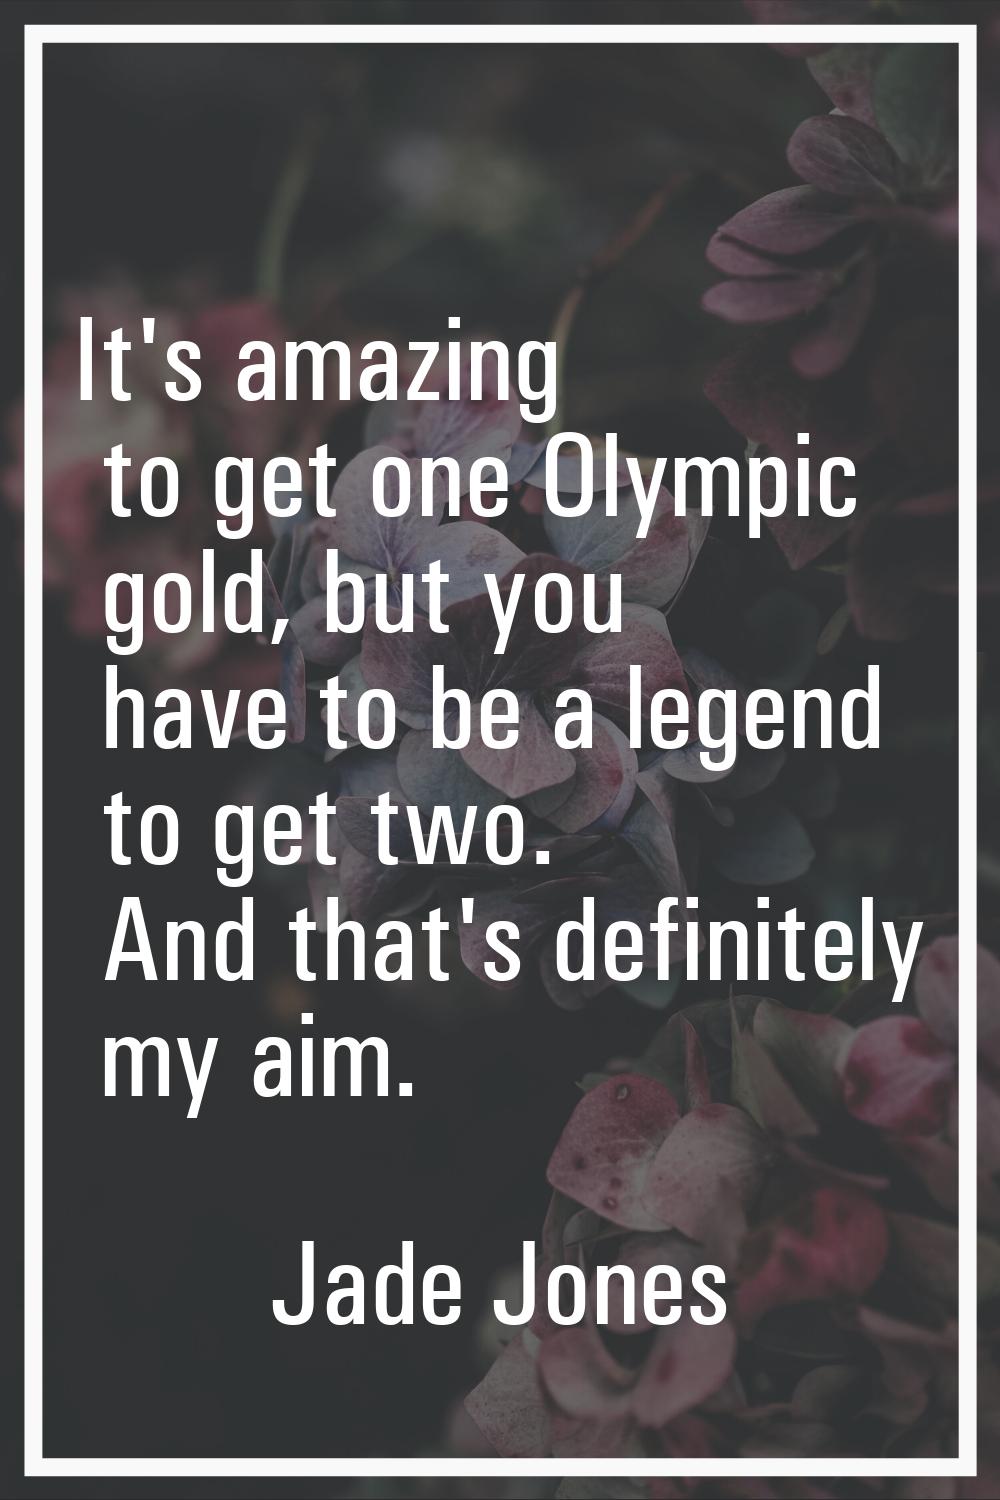 It's amazing to get one Olympic gold, but you have to be a legend to get two. And that's definitely